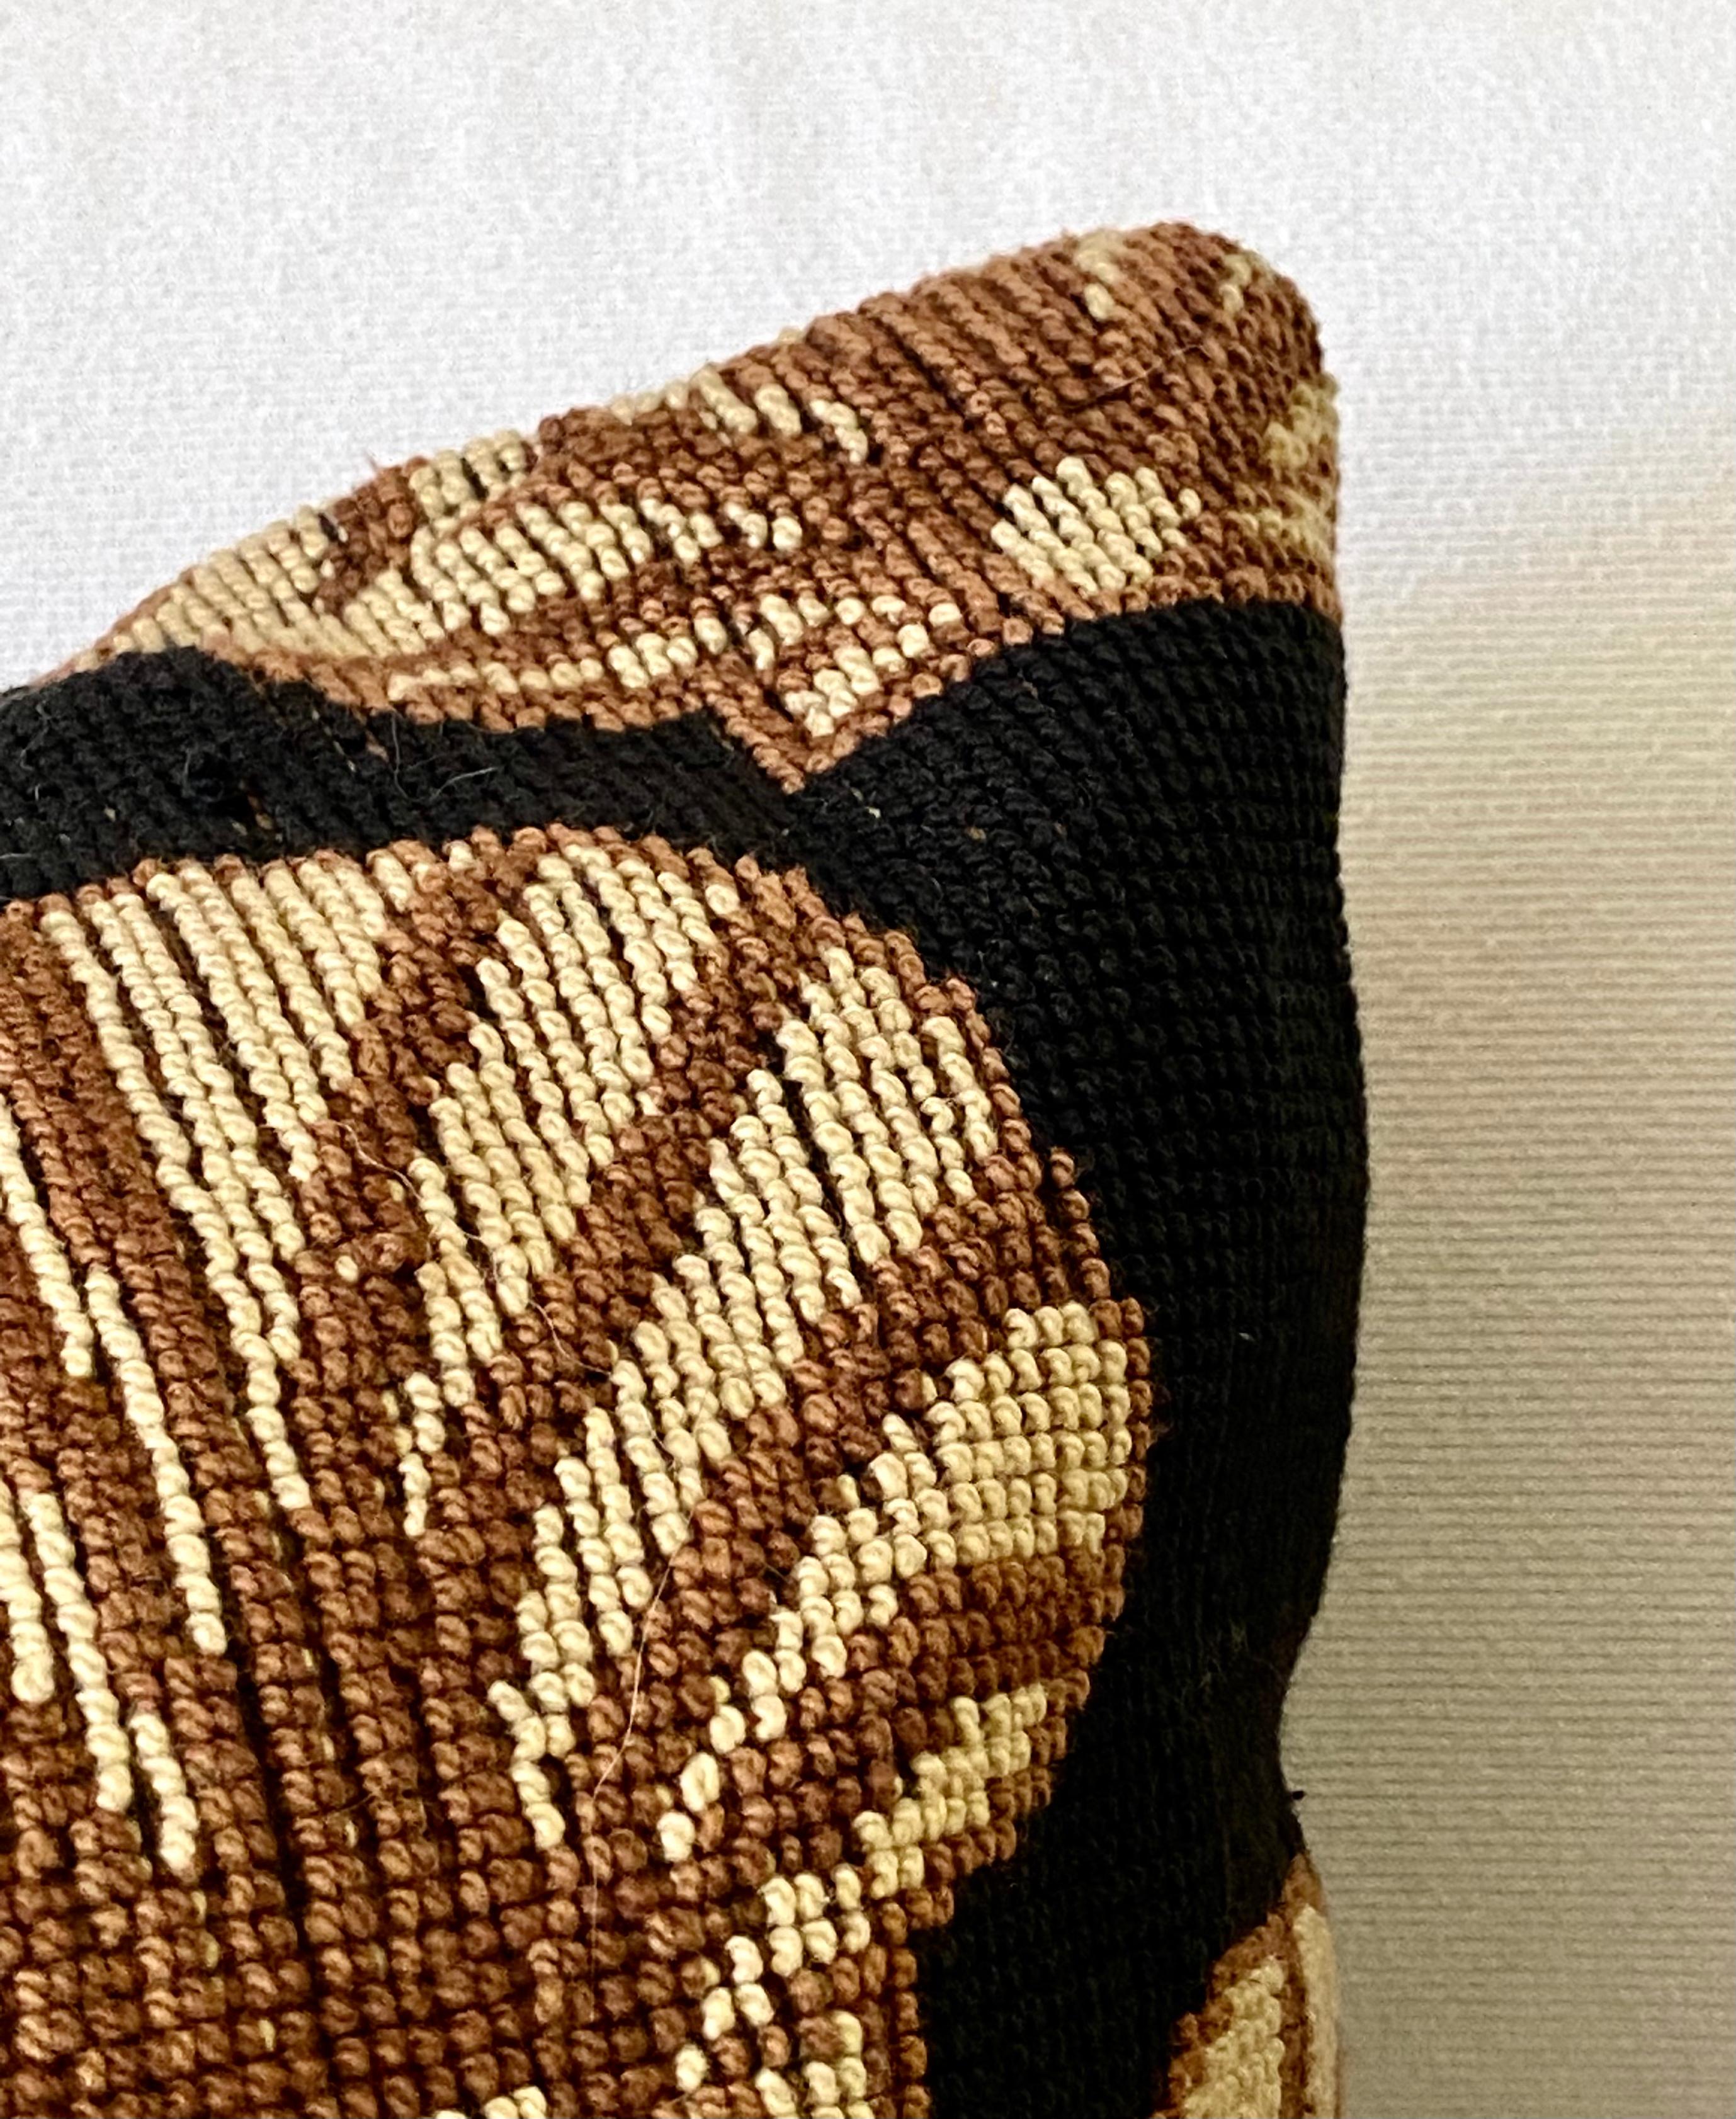 American Modern Gros Point Pair of Pillows, in Black with Tan Sea Shell Motive For Sale